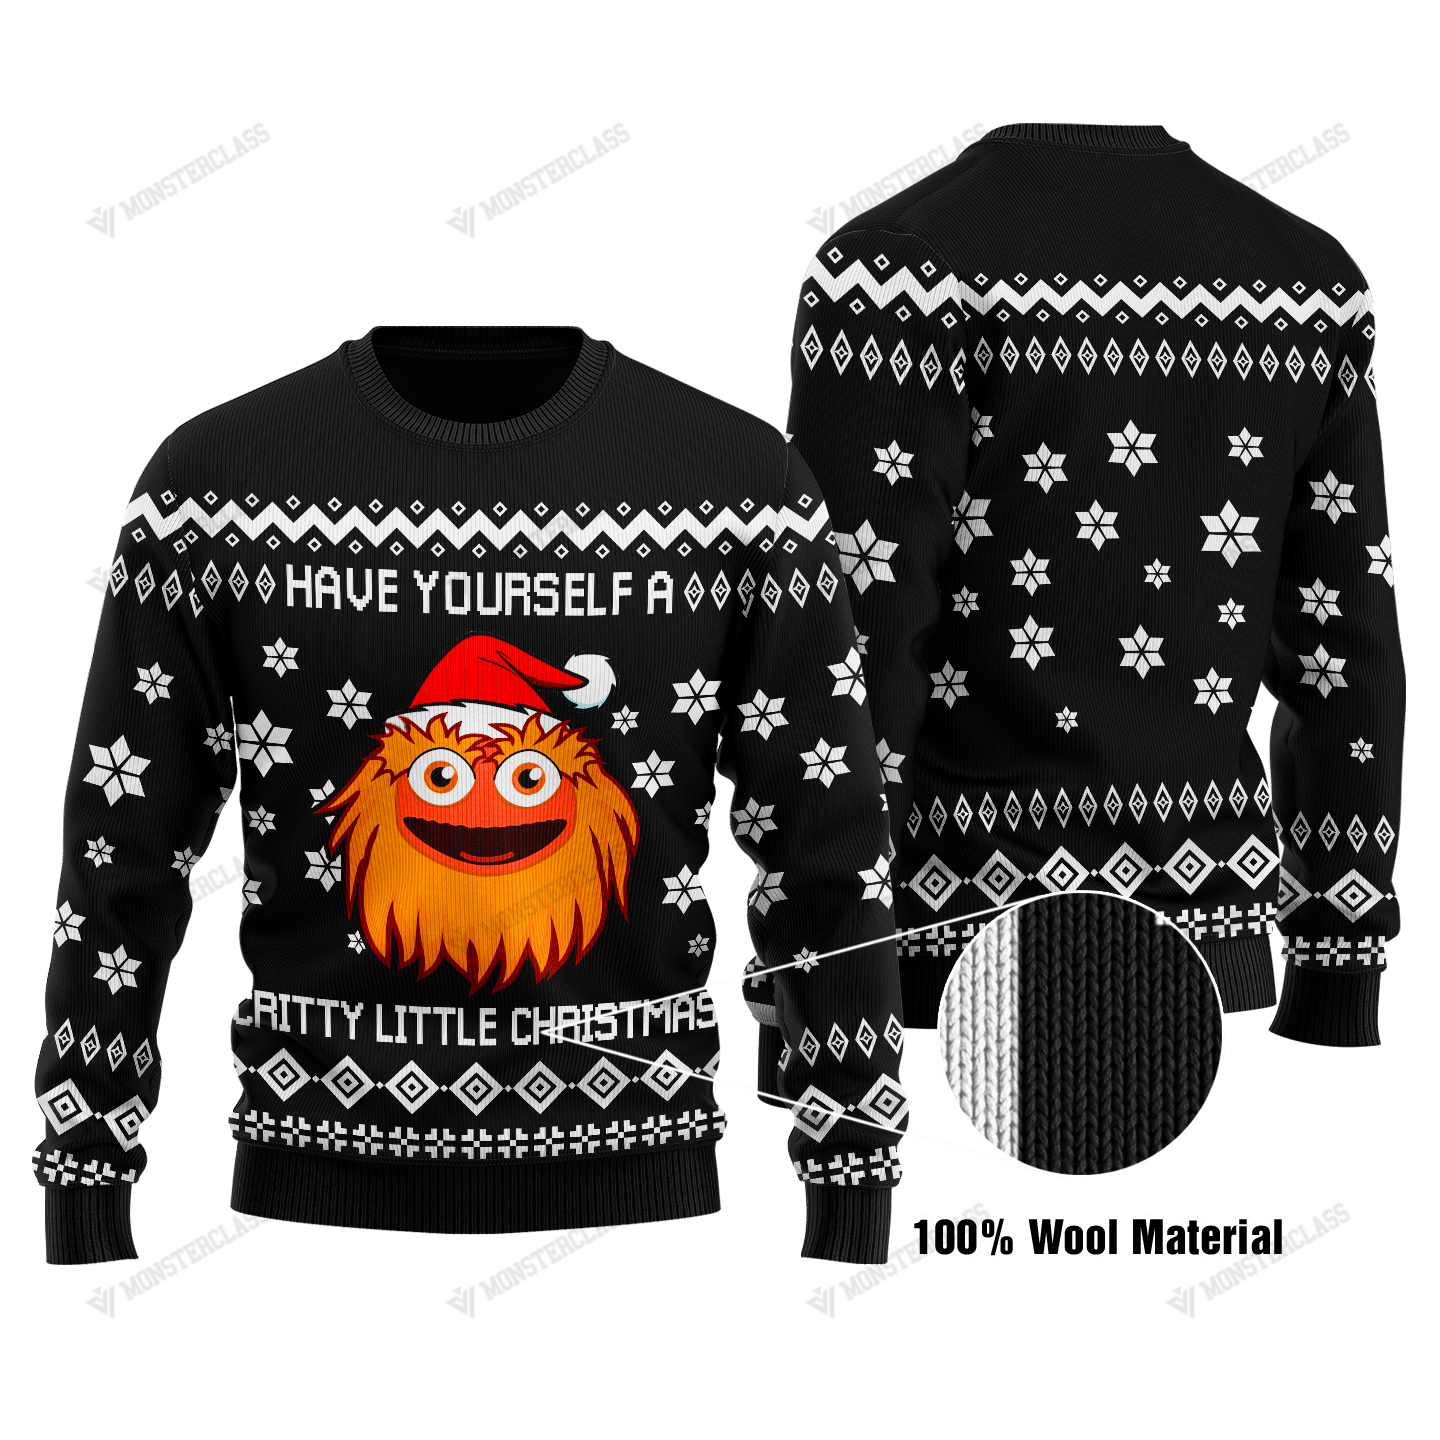 Have yourself a gritty little christmas Gritty christmas sweater